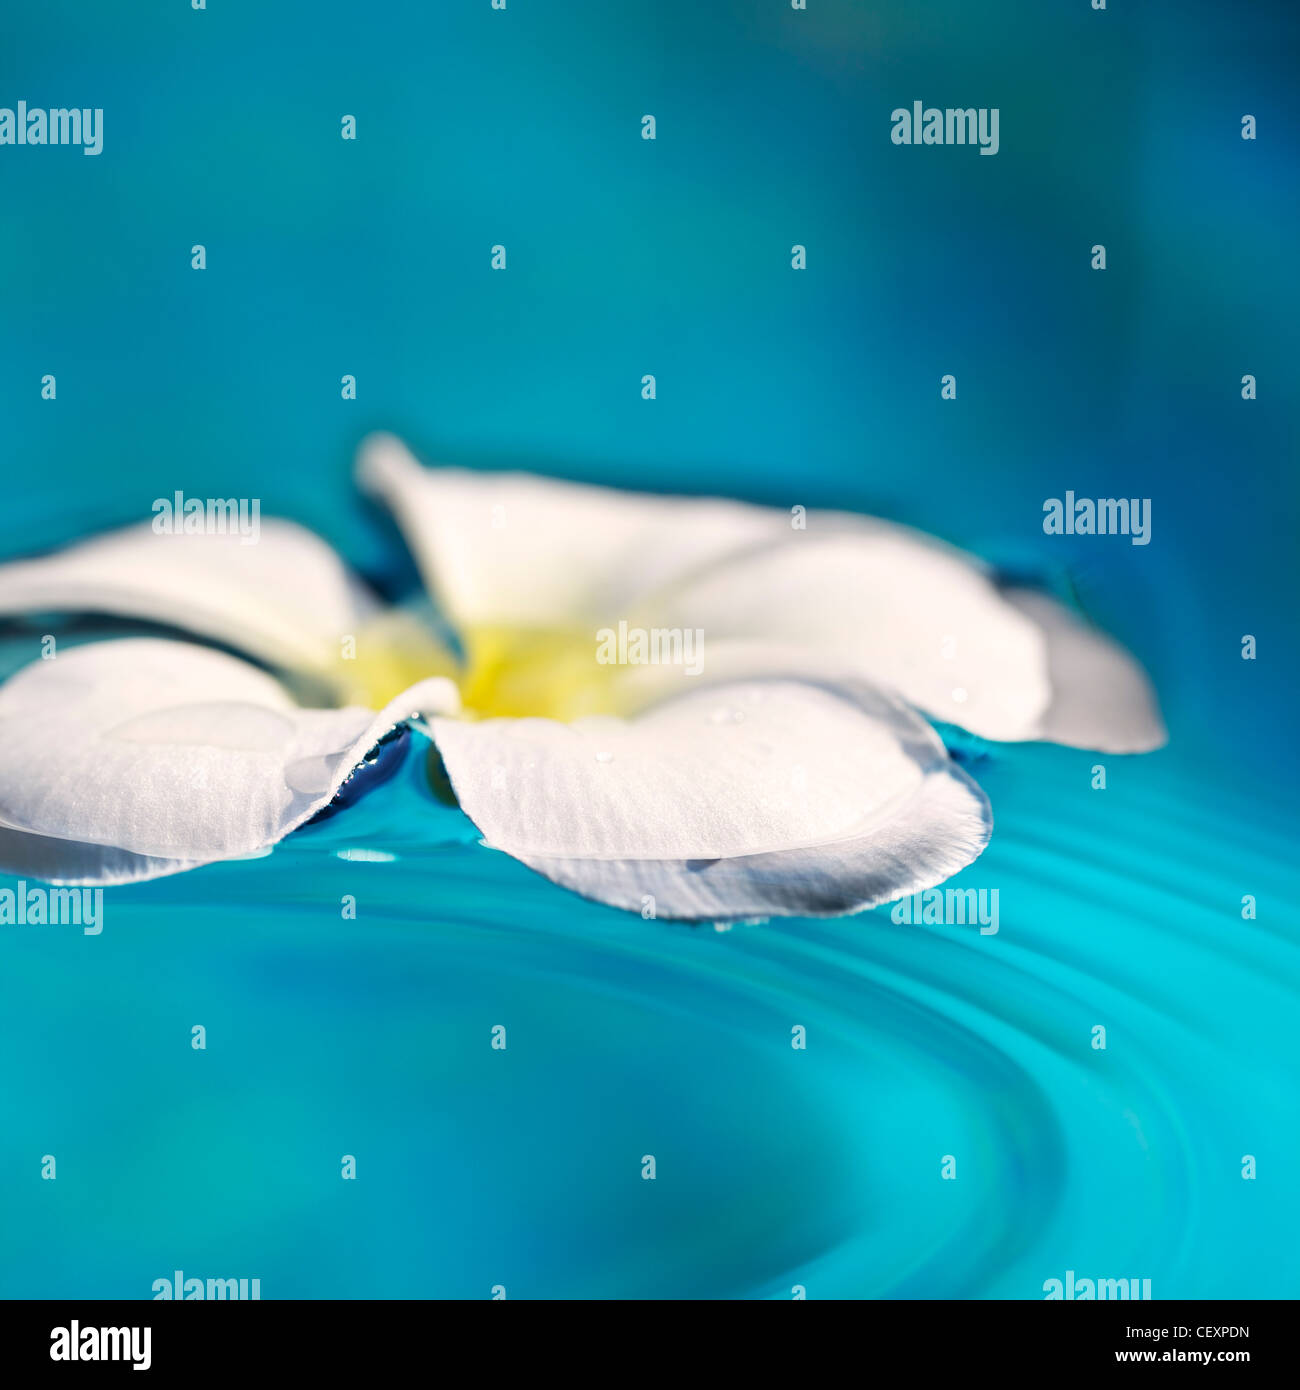 Frangipani flower in a water. Square composition. Very shallow depth of field. Stock Photo